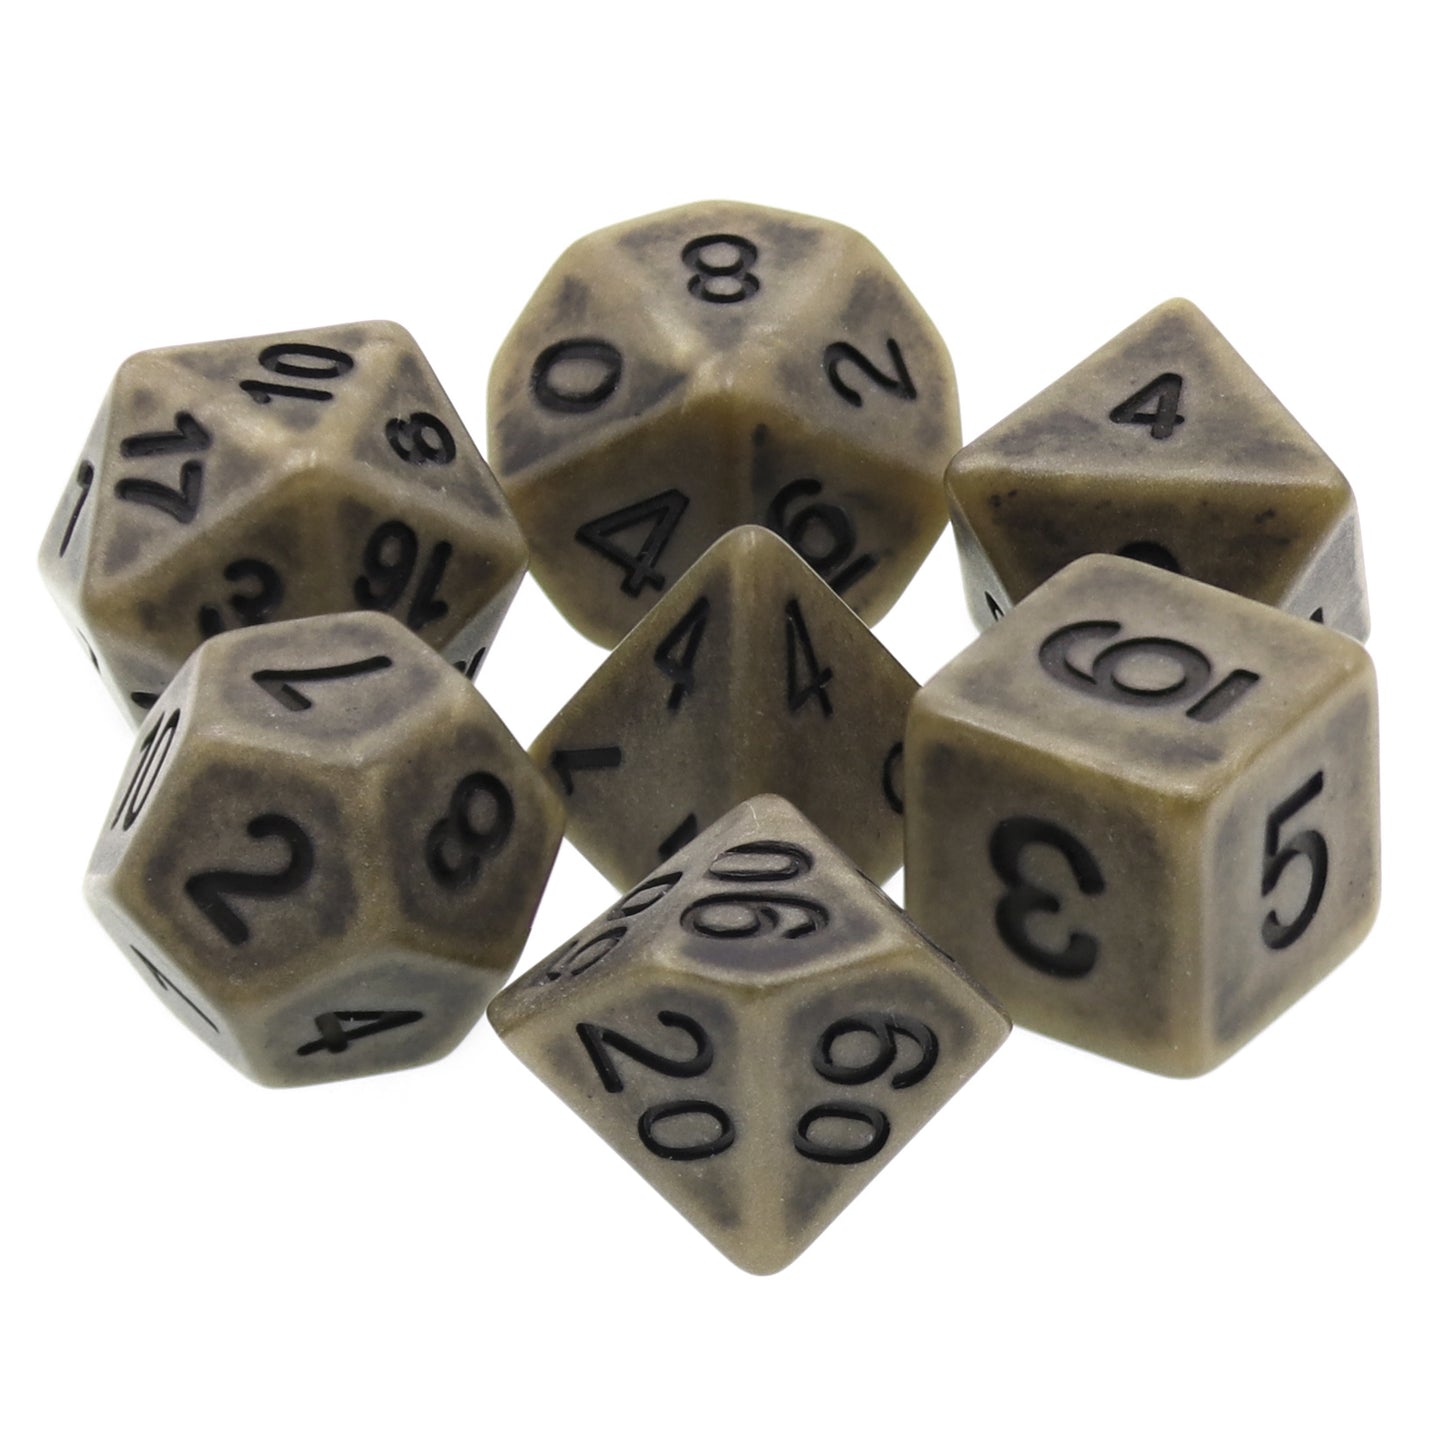 Ancient Moss 7pc Dice Set Inked in Black